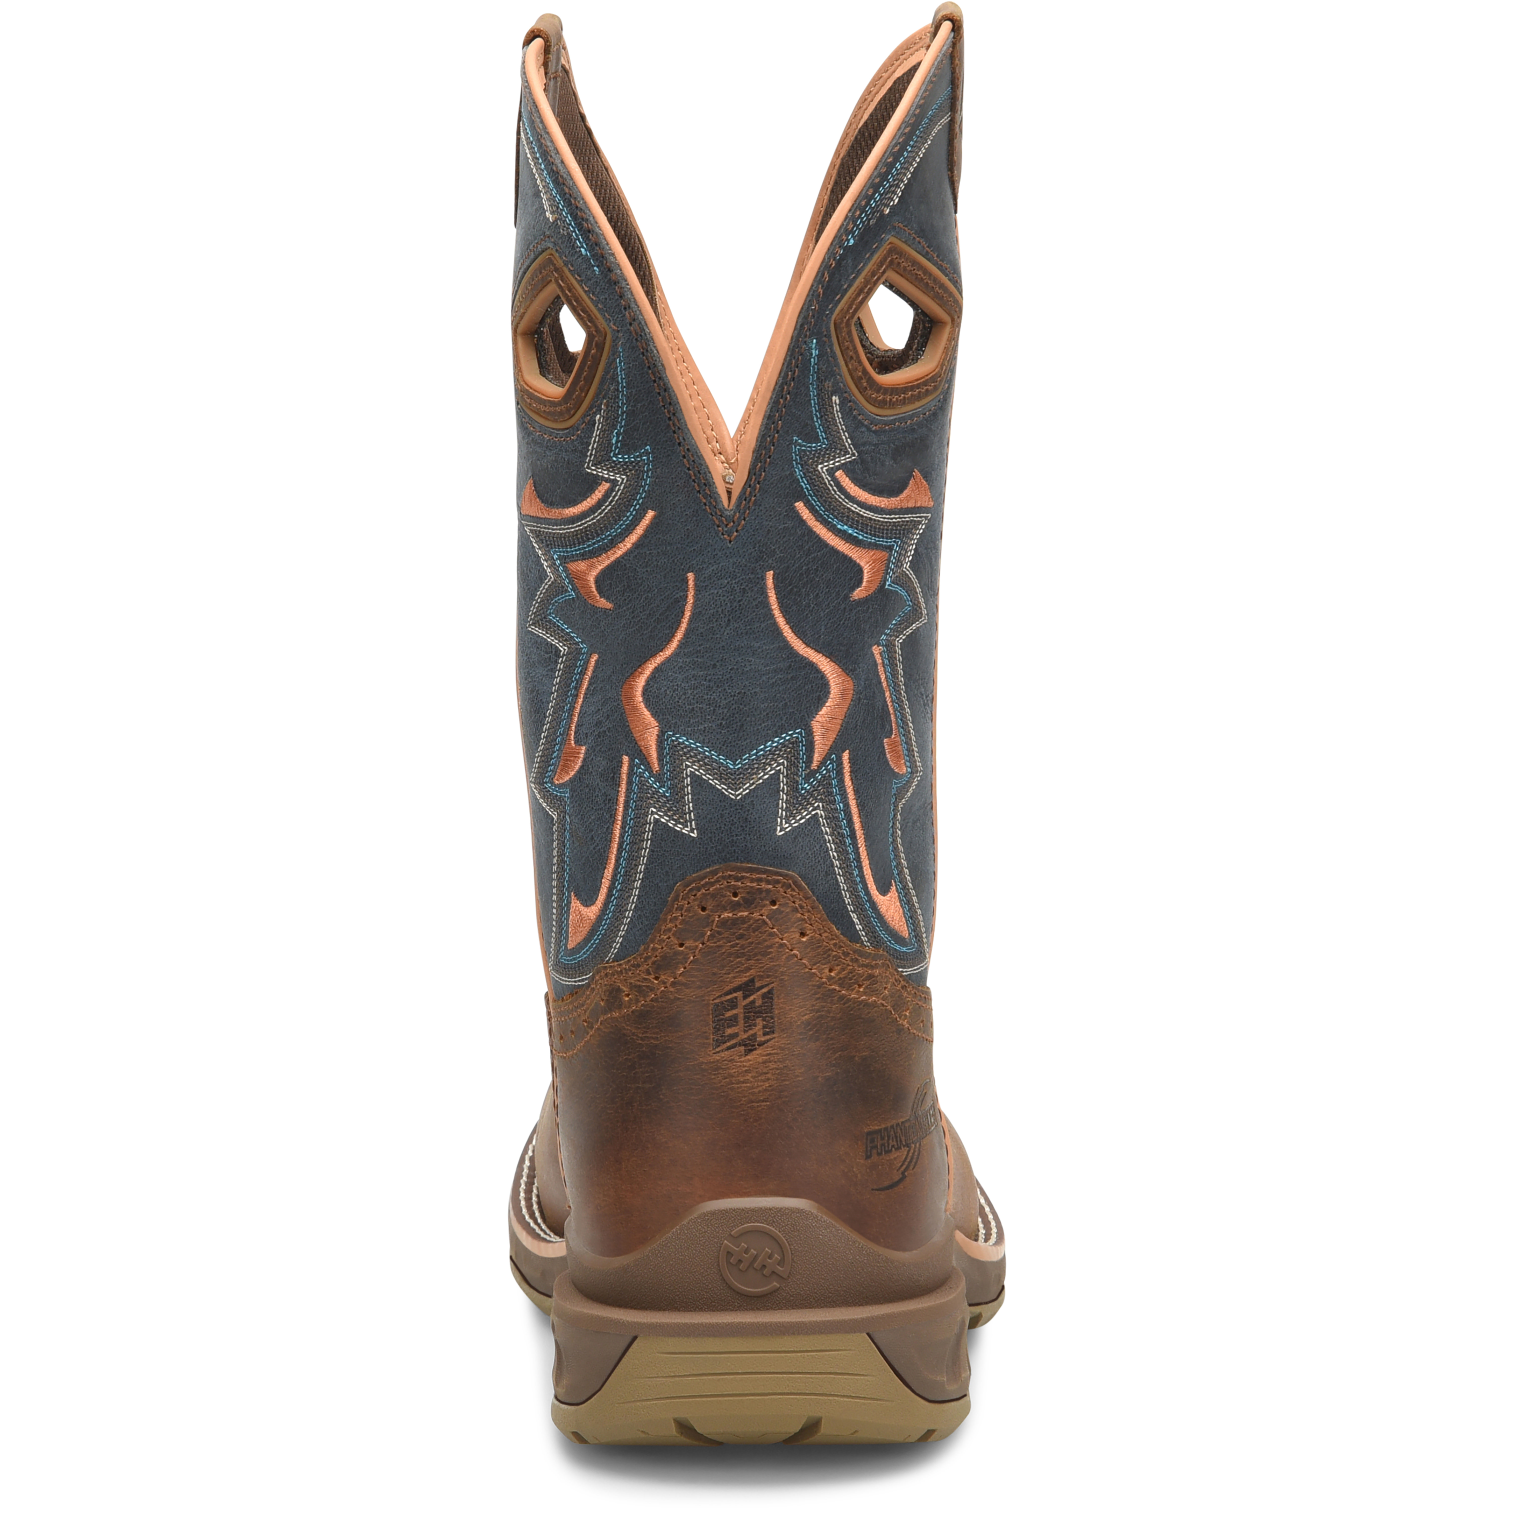 Double H Men's Troy 11" Square Toe WP Western Work Boot Brown- DH5357  - Overlook Boots